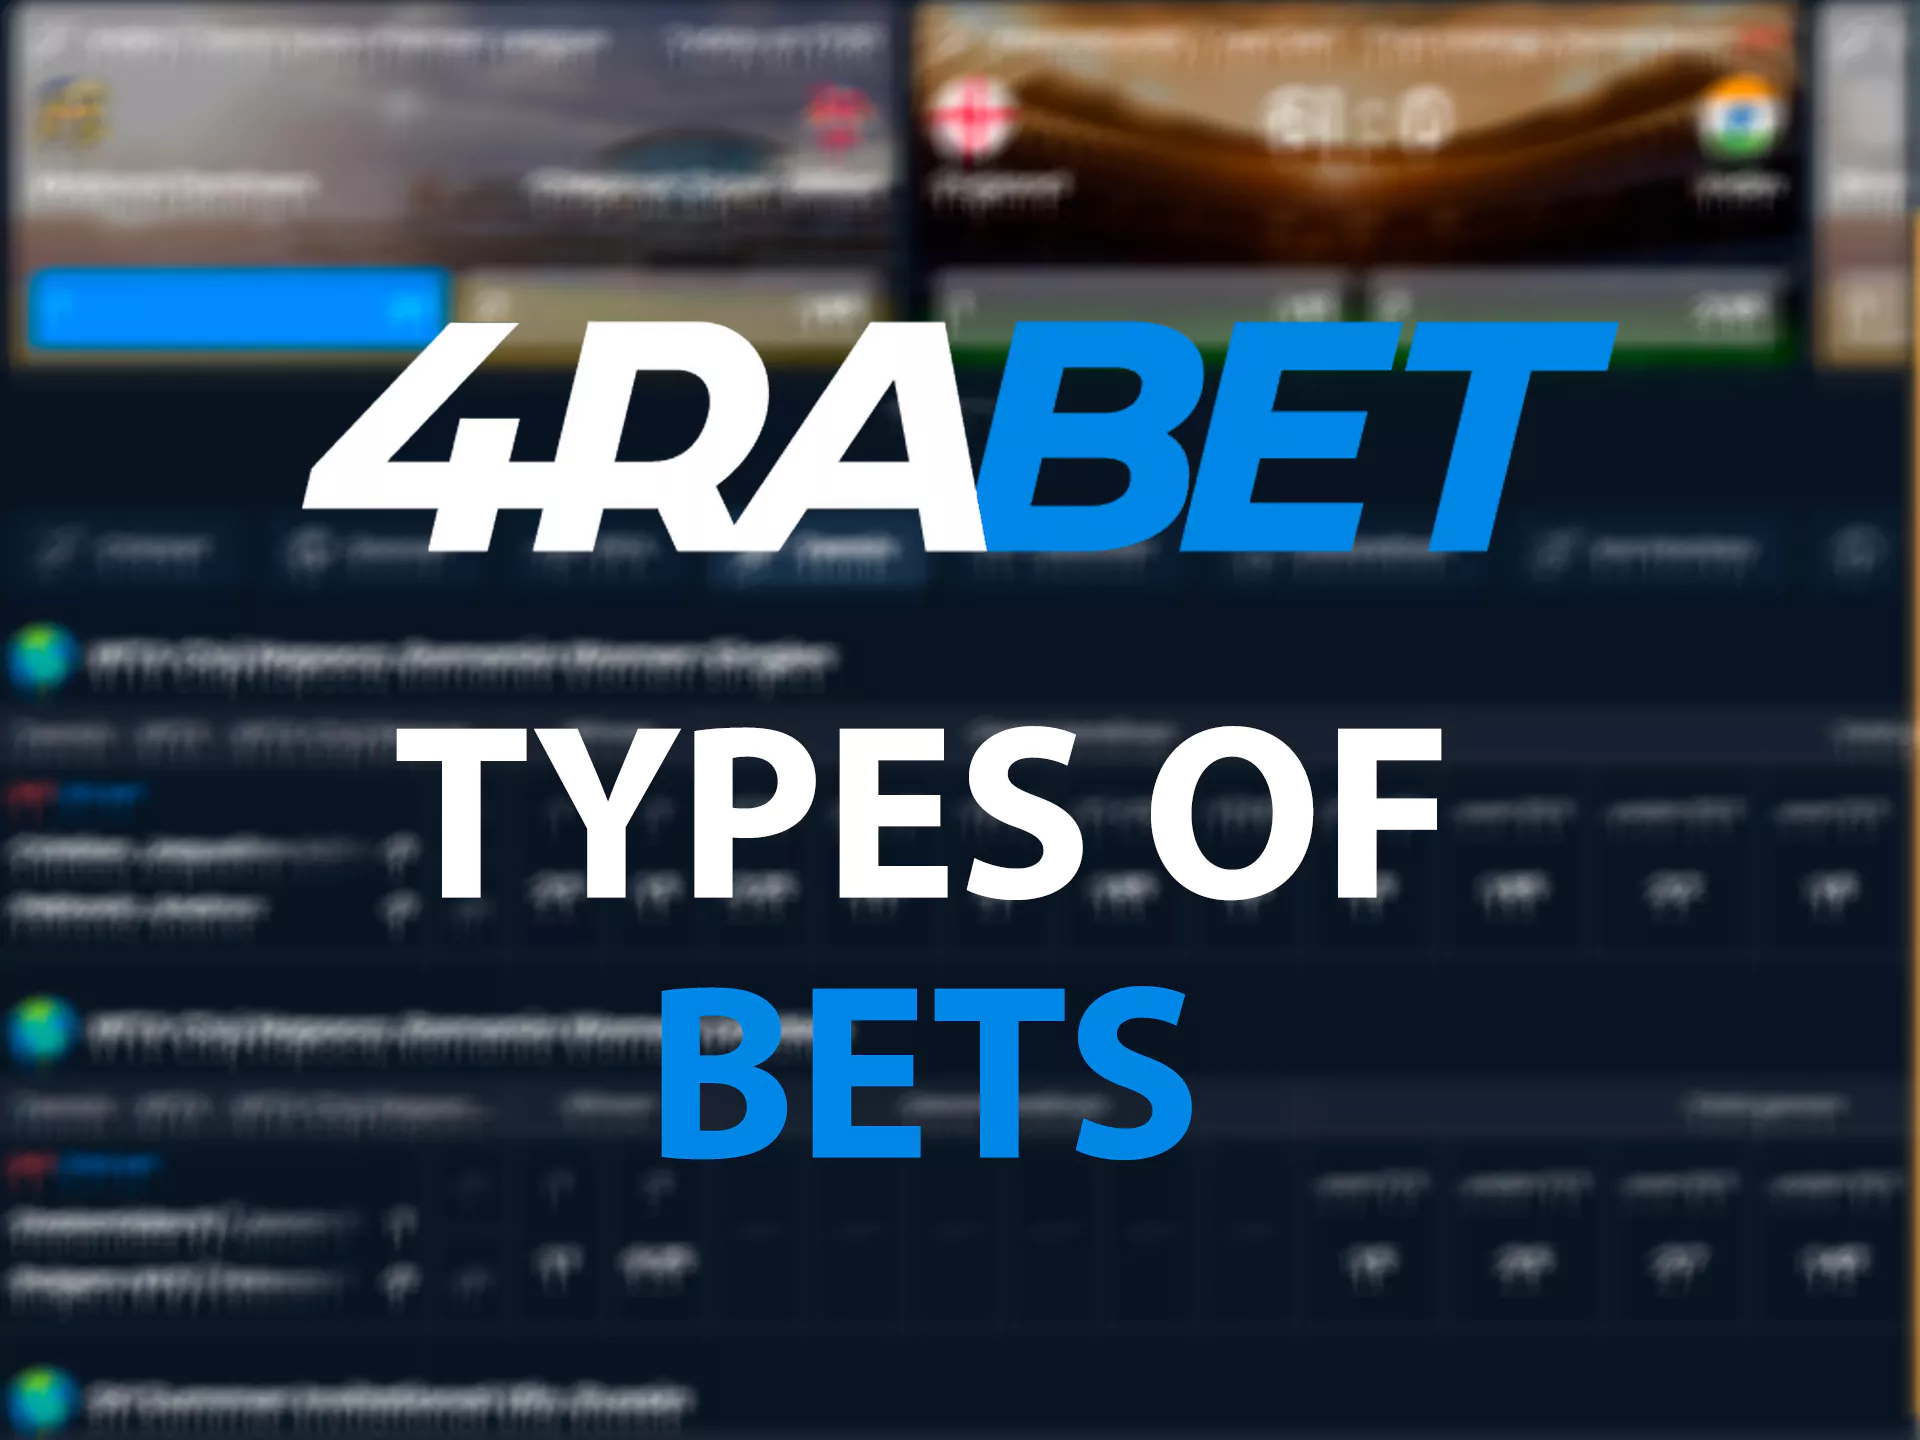 4rabet offers differen betting markets with attractive odds.